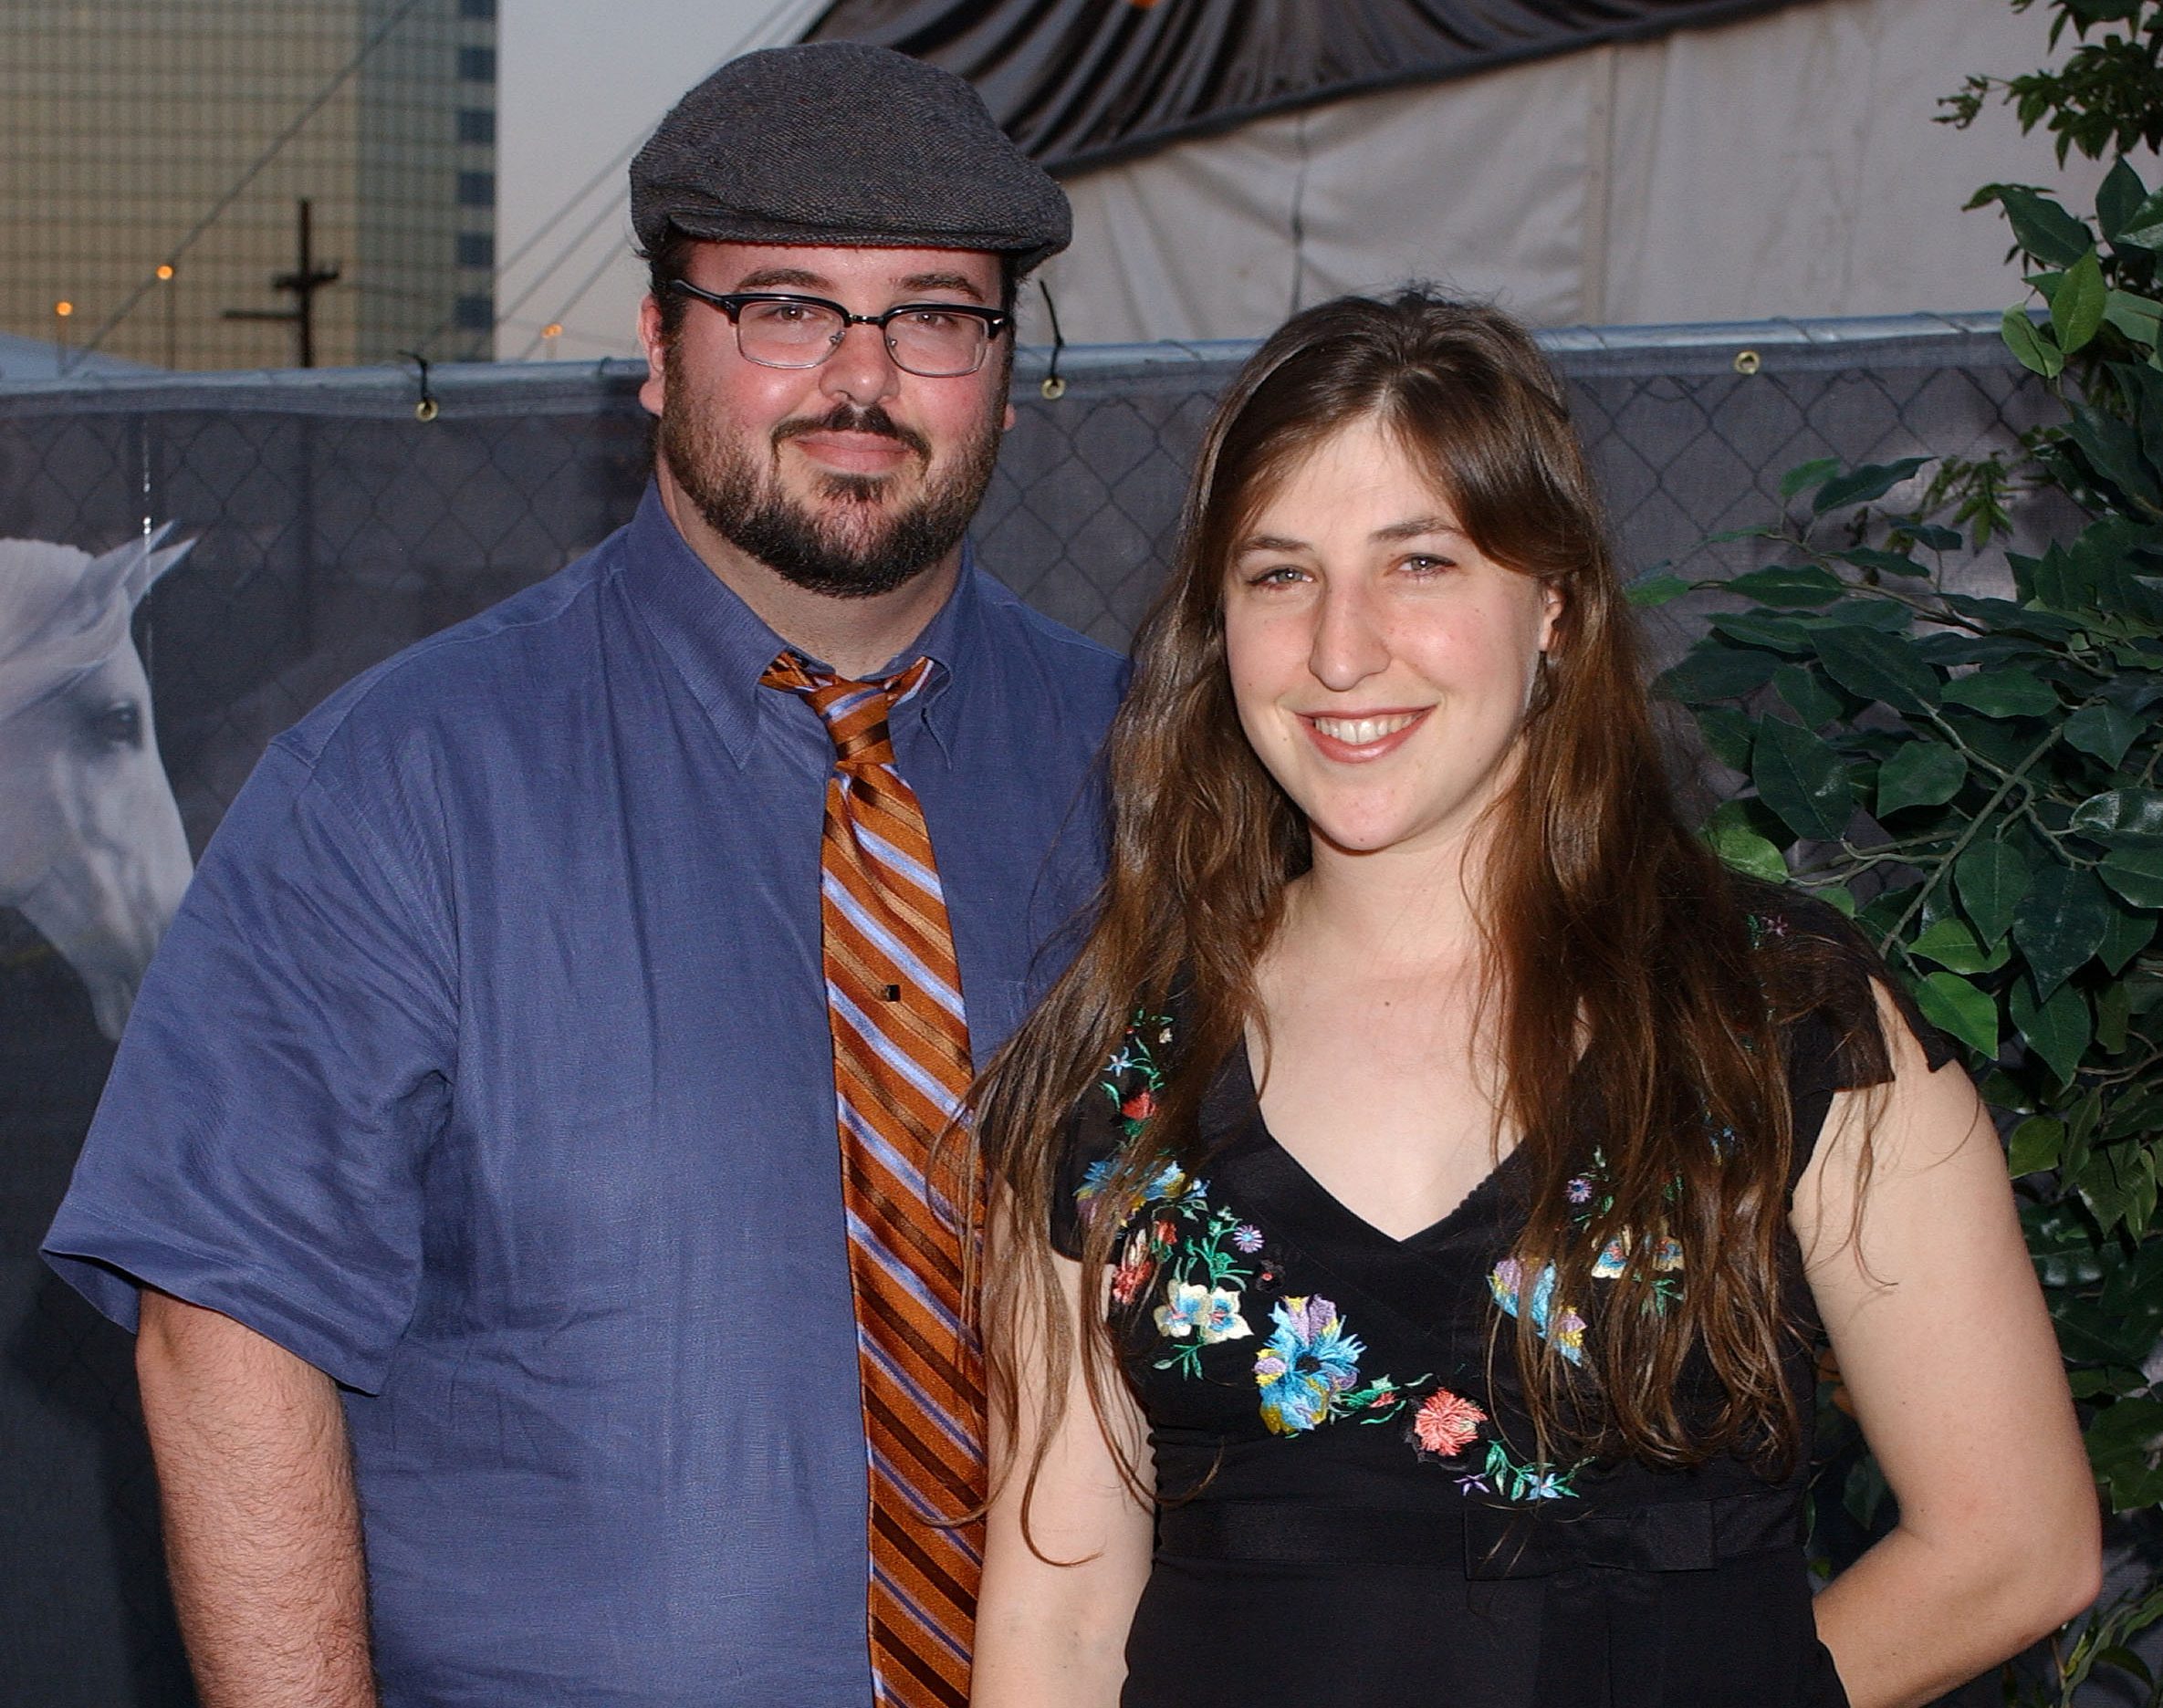 Are Mayim and Jonathan a couple?